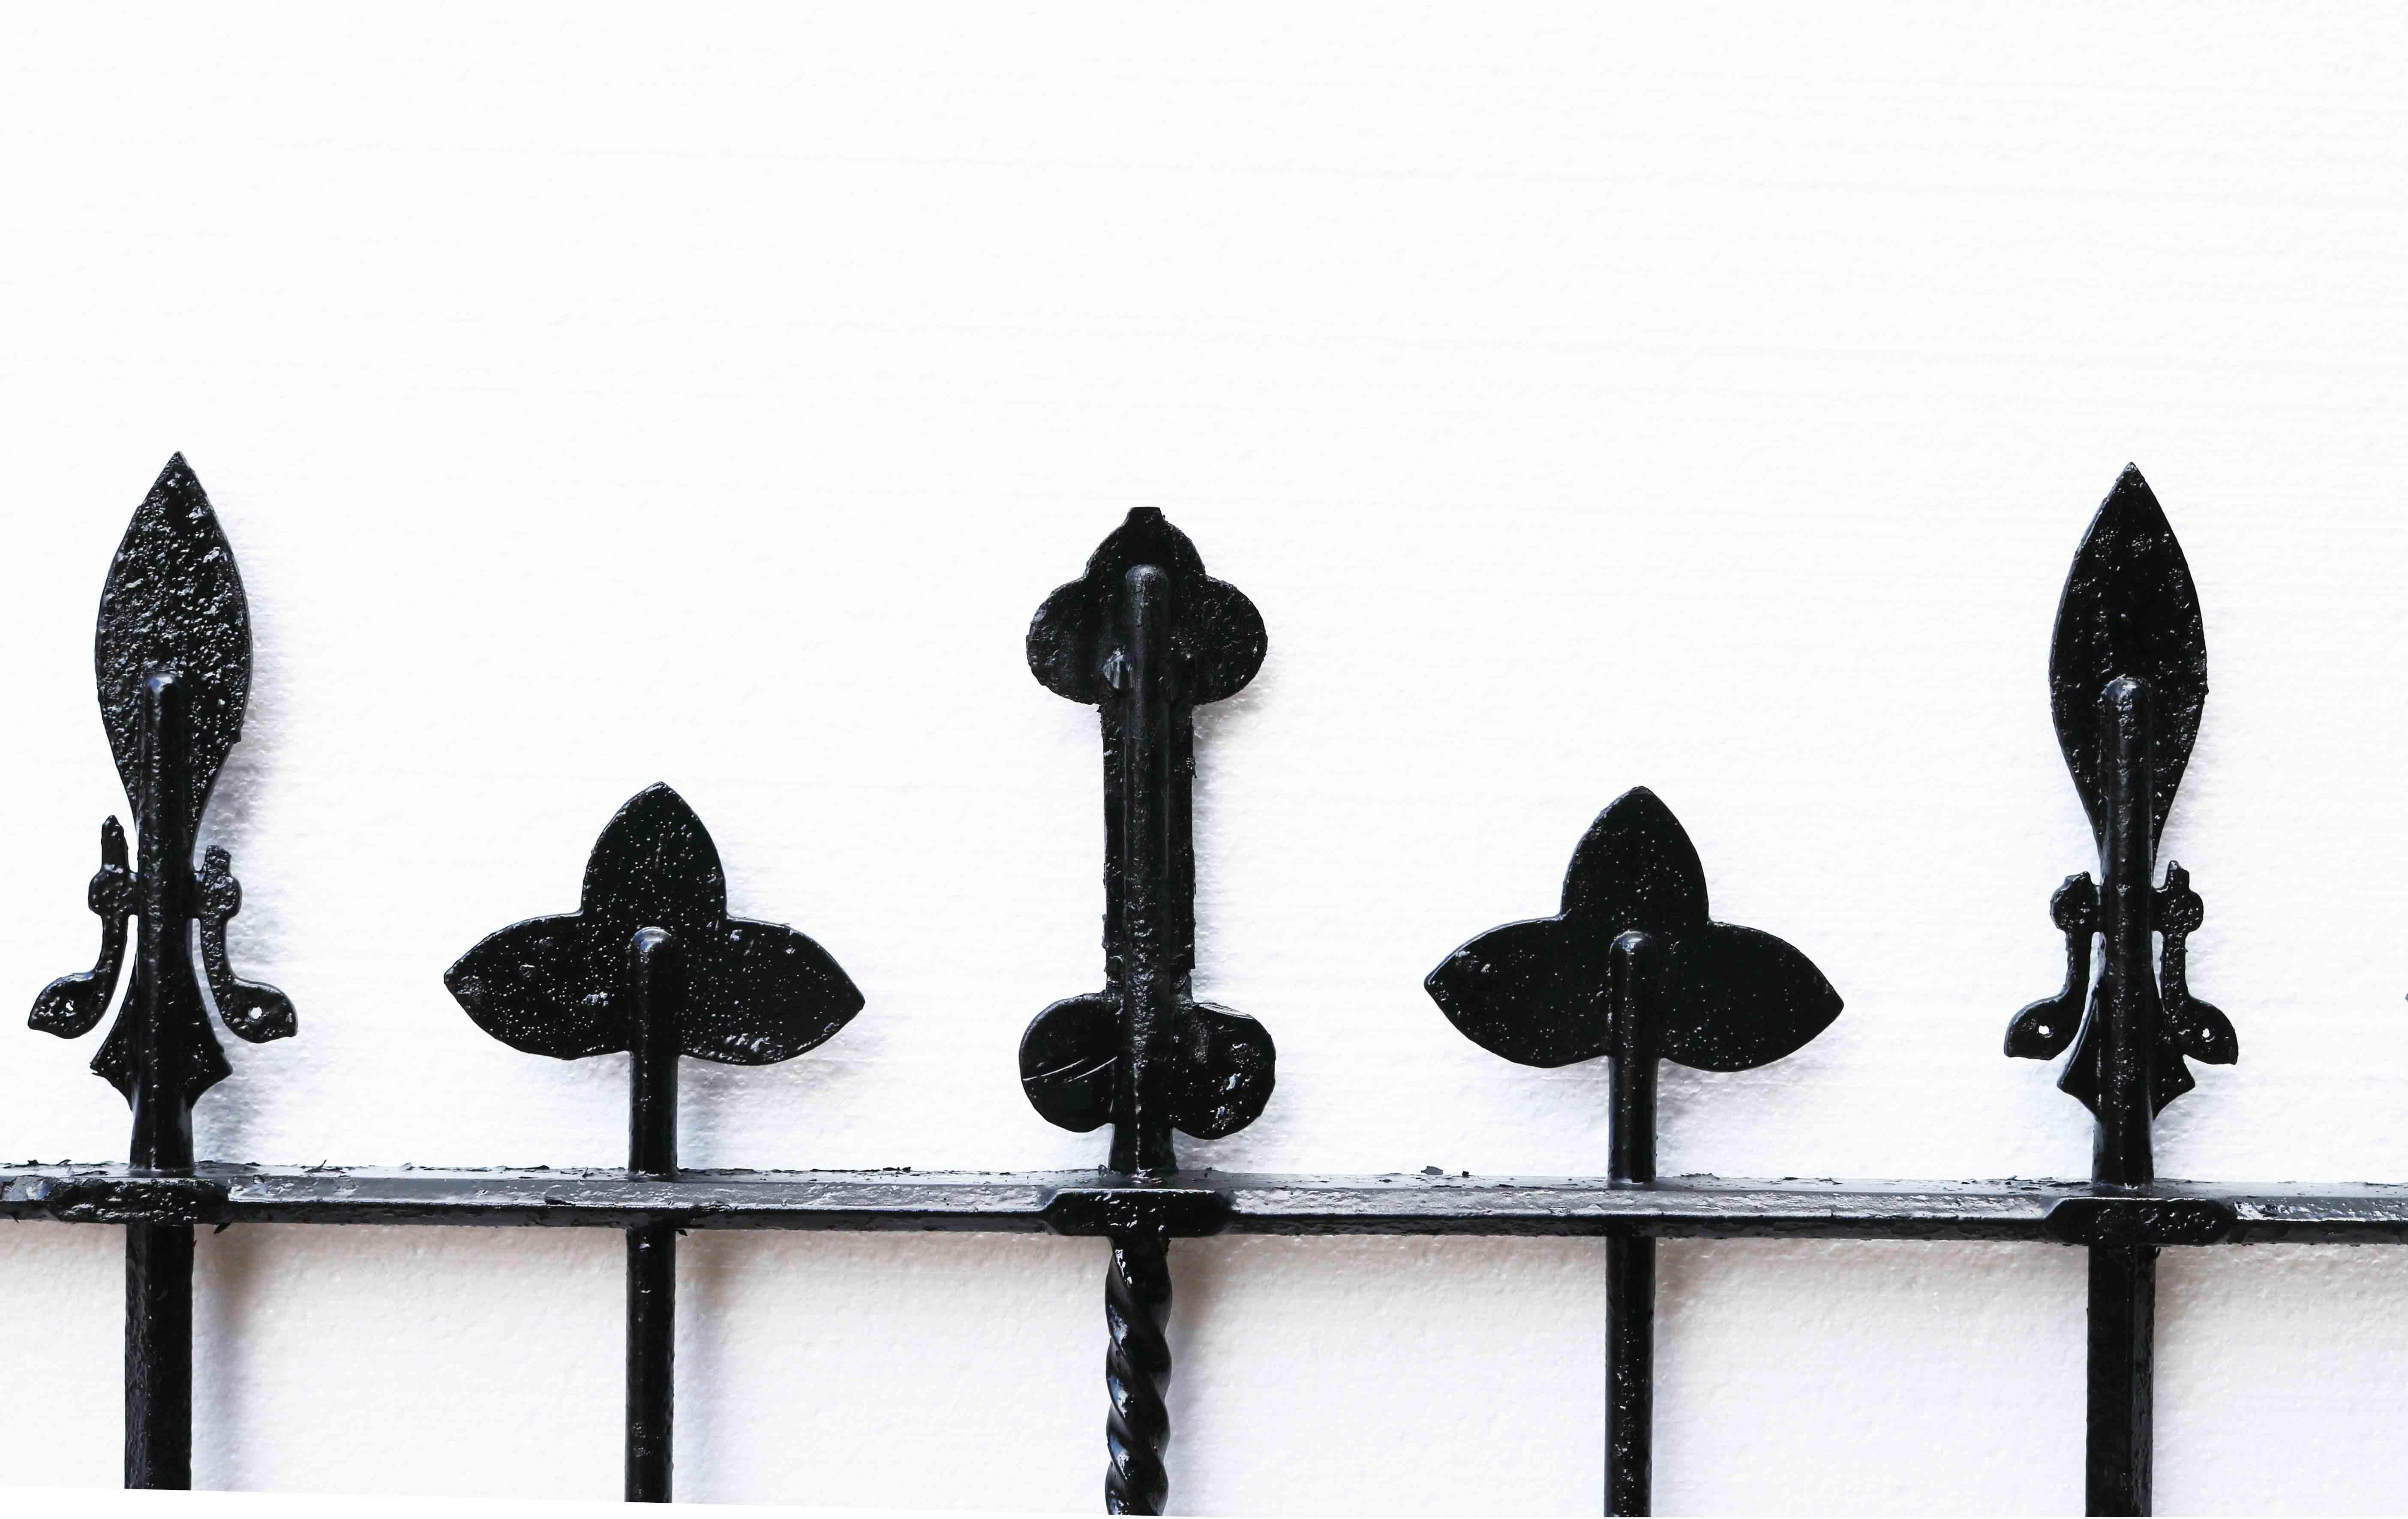 About

A pair of good quality blacksmith made wrought iron gates removed from a Church in Oxfordshire.

Condition report

Recent black paint. No breaks or bends. Good structural condition.

Stay and handle are present, these are seized.